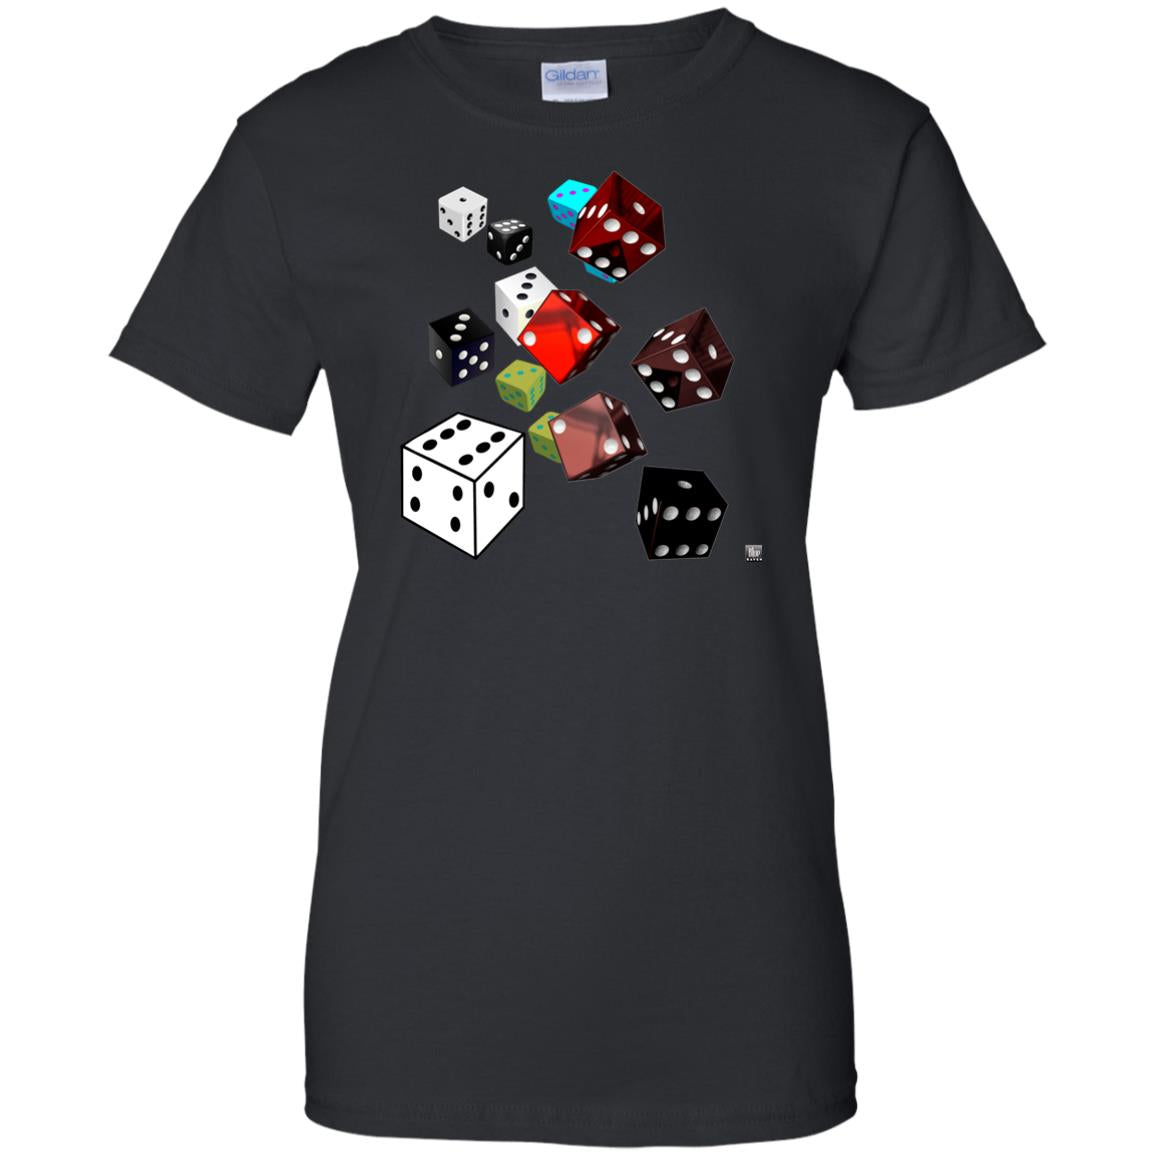 roll of the dice - Women's Relaxed Fit T-Shirt